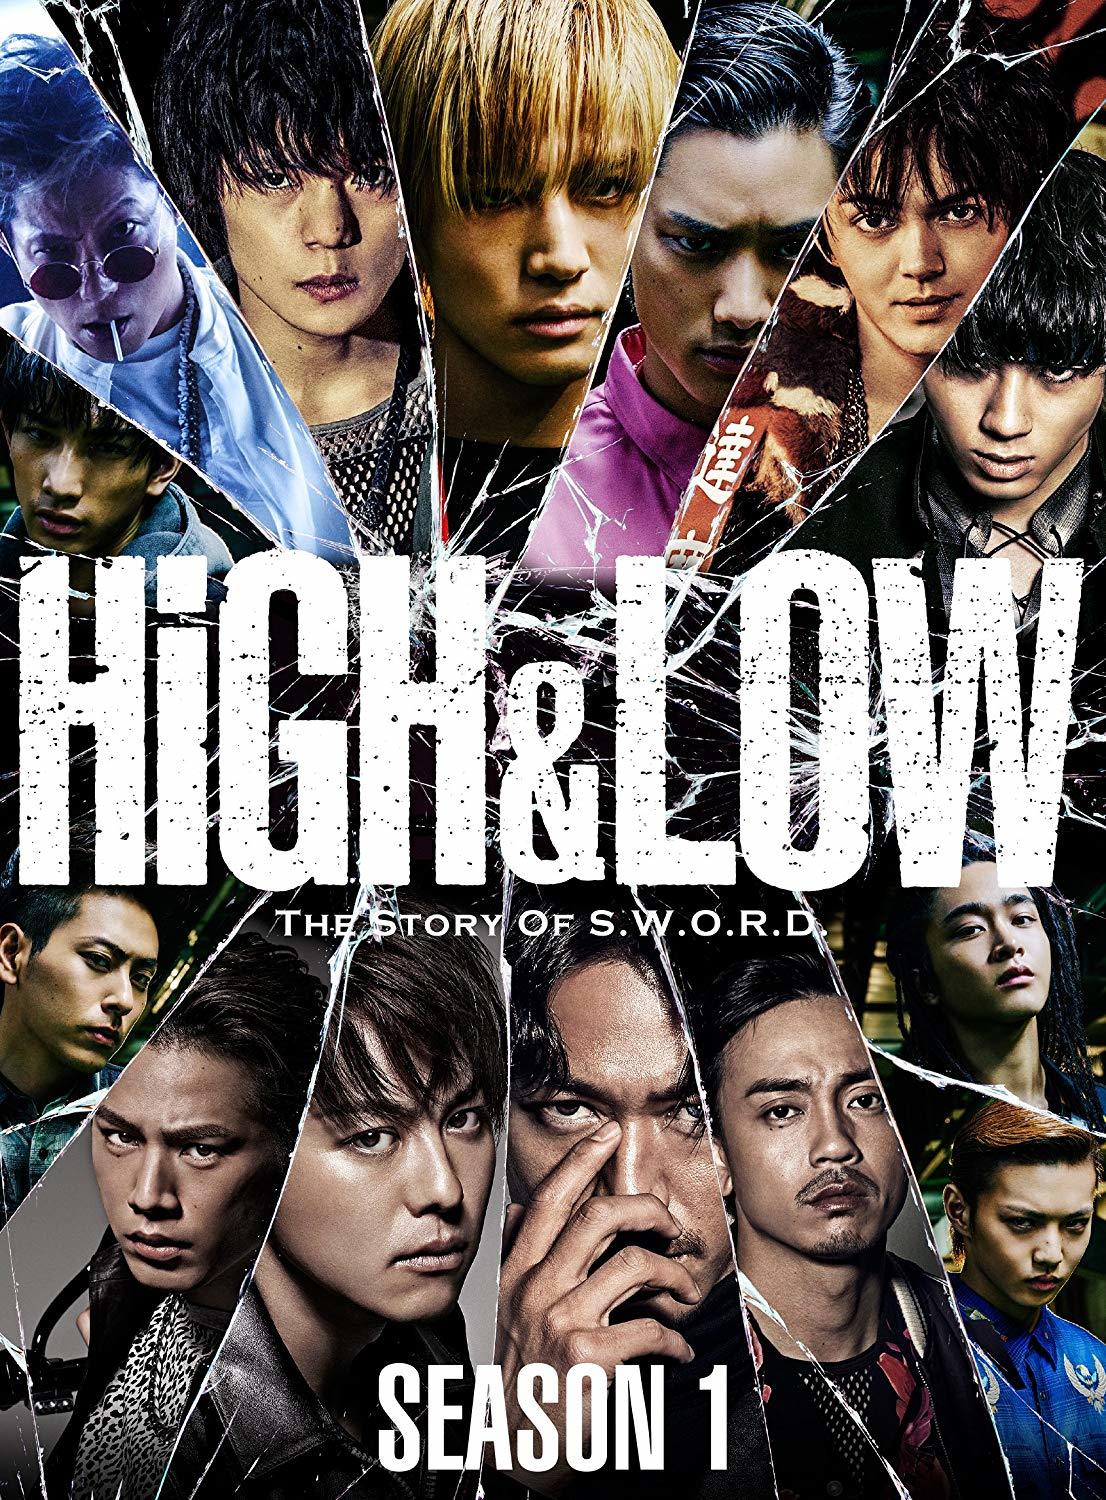 High and Low: The Story of S.W.O.R.D. Season 1 Complete Series Box 